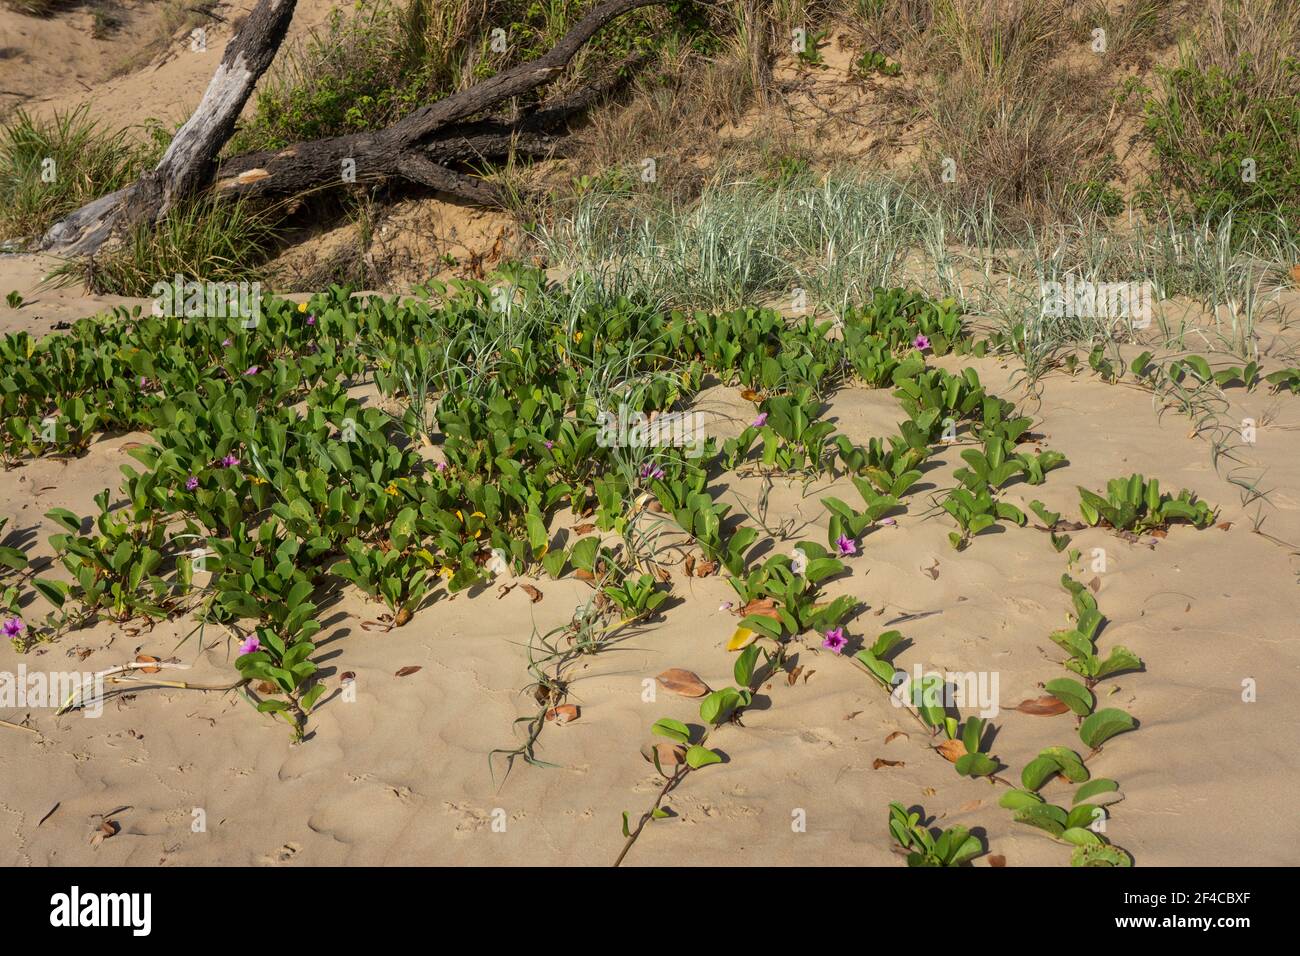 Beach grass and beach morning glory vine, ipomoea pres-caprae, growing on beach sand dunes helping against erosion from wind and water. Stock Photo